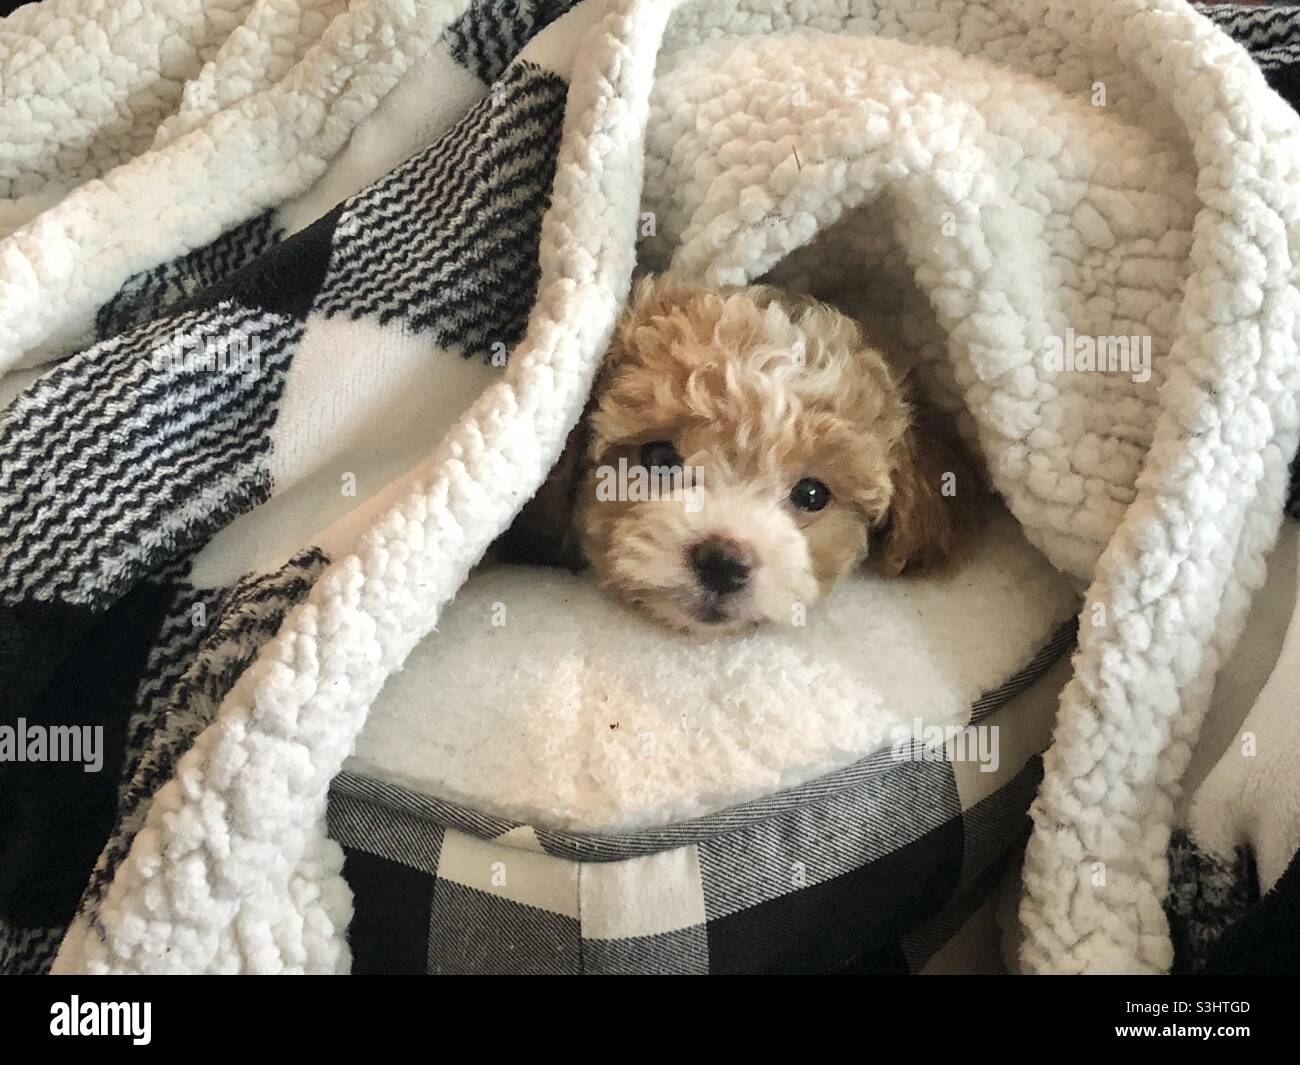 Sleeping puppy wrapped in gingham blanket. Stock Photo